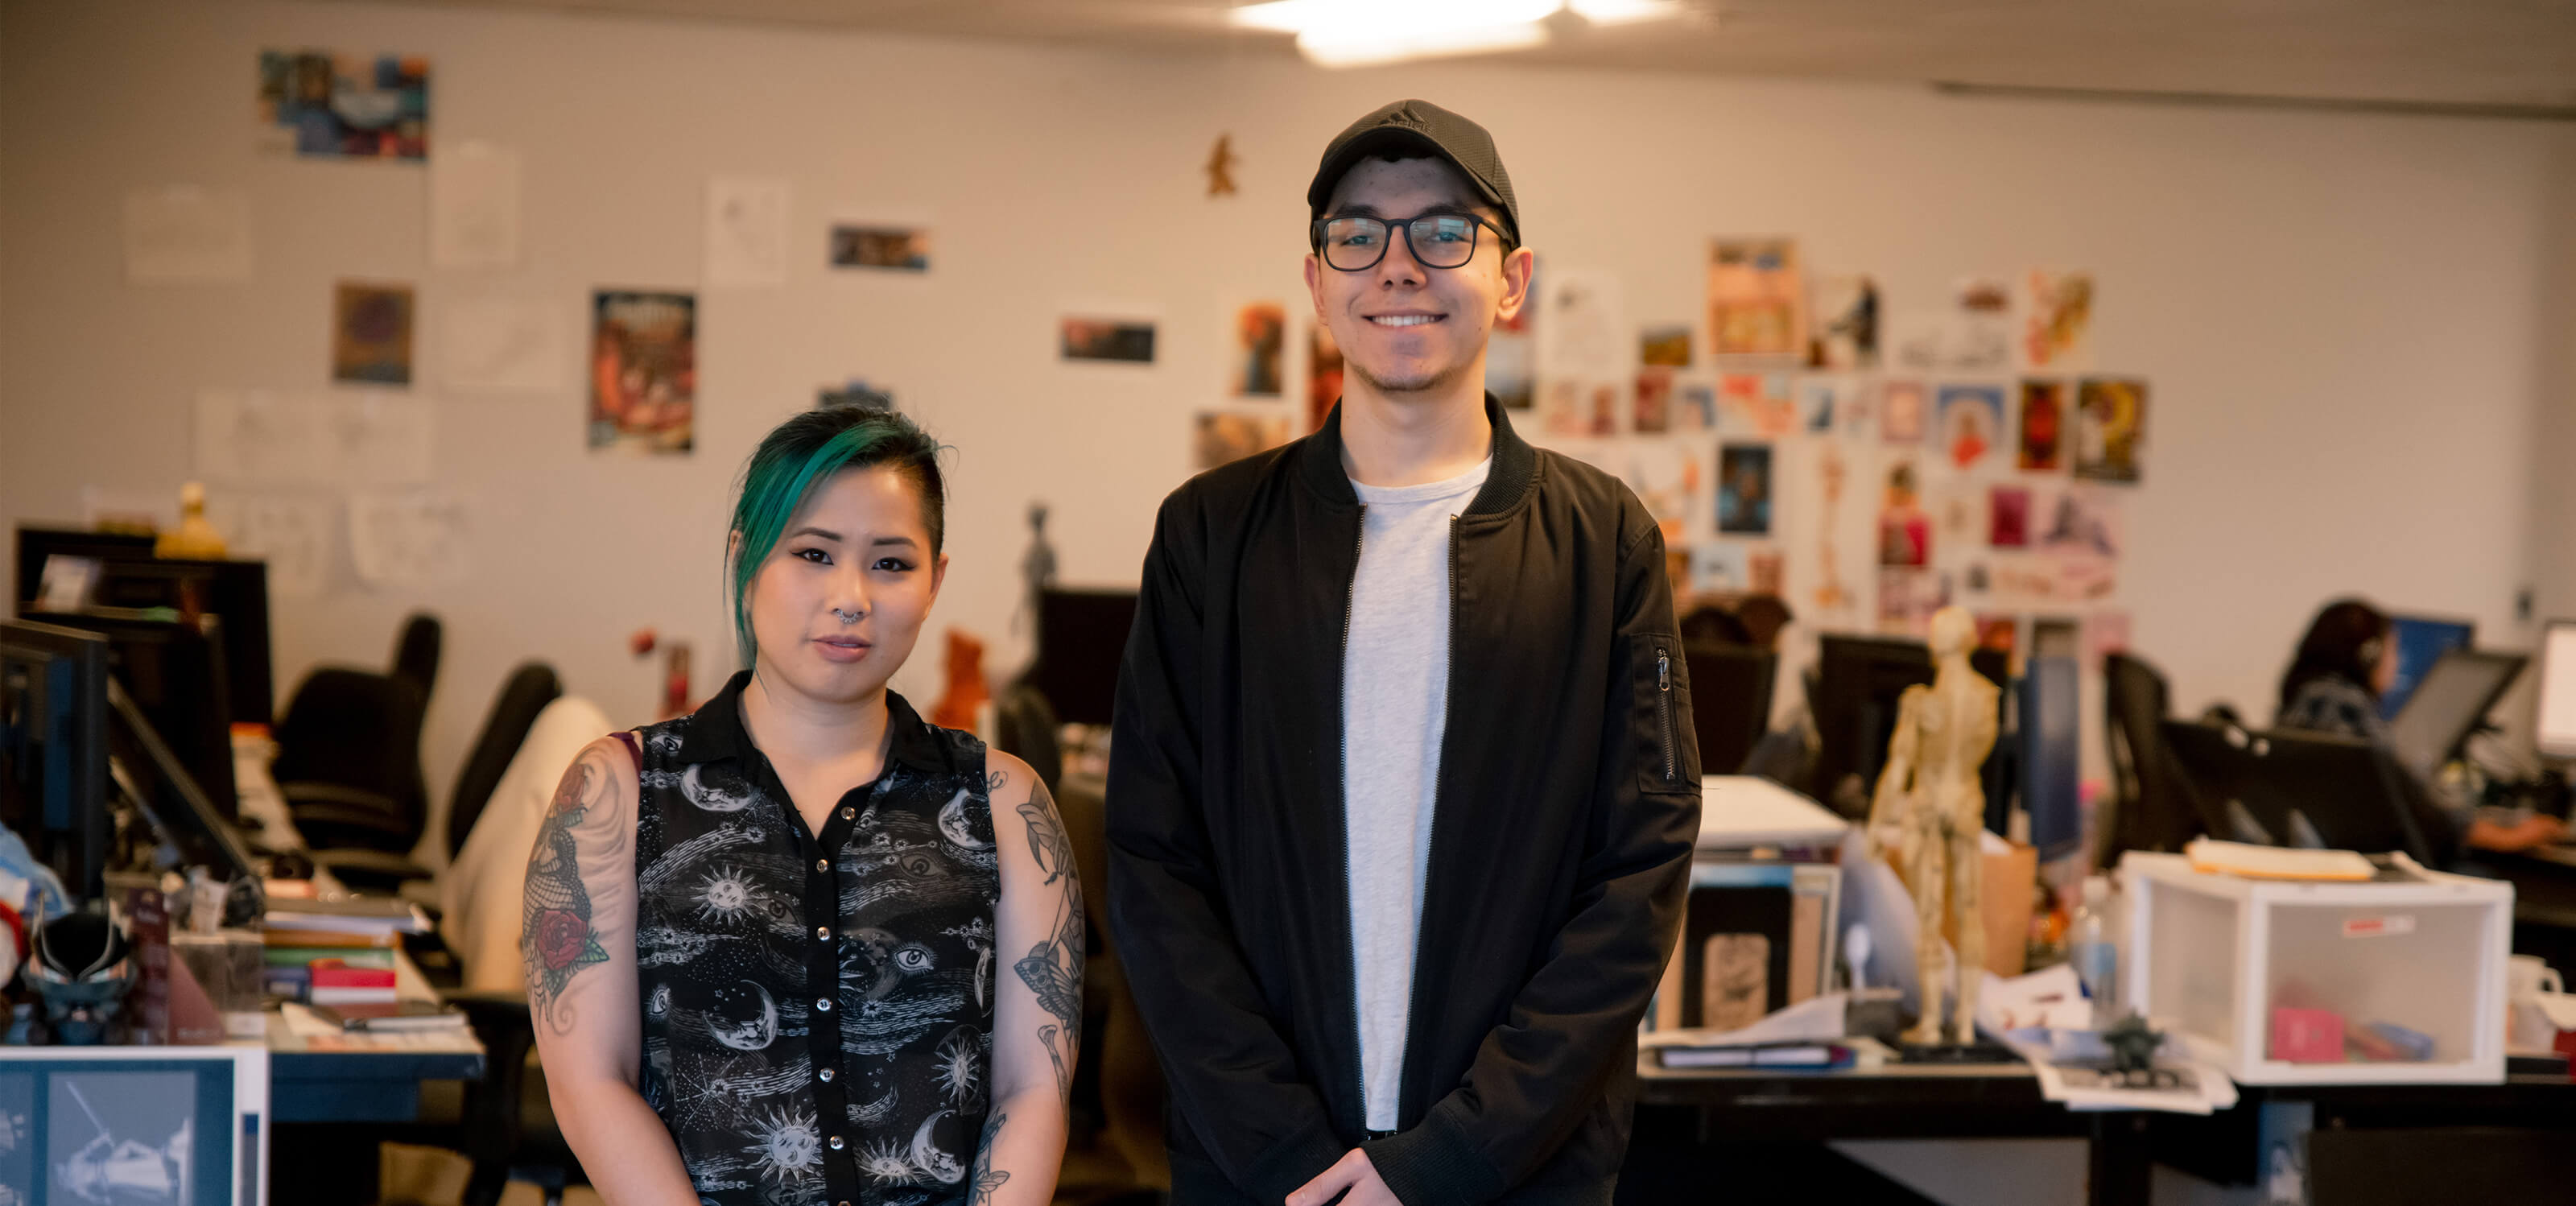 Trang “Sushie” Ta and Jesse Munguia stand next to each other in the DigiPen MFA lab.